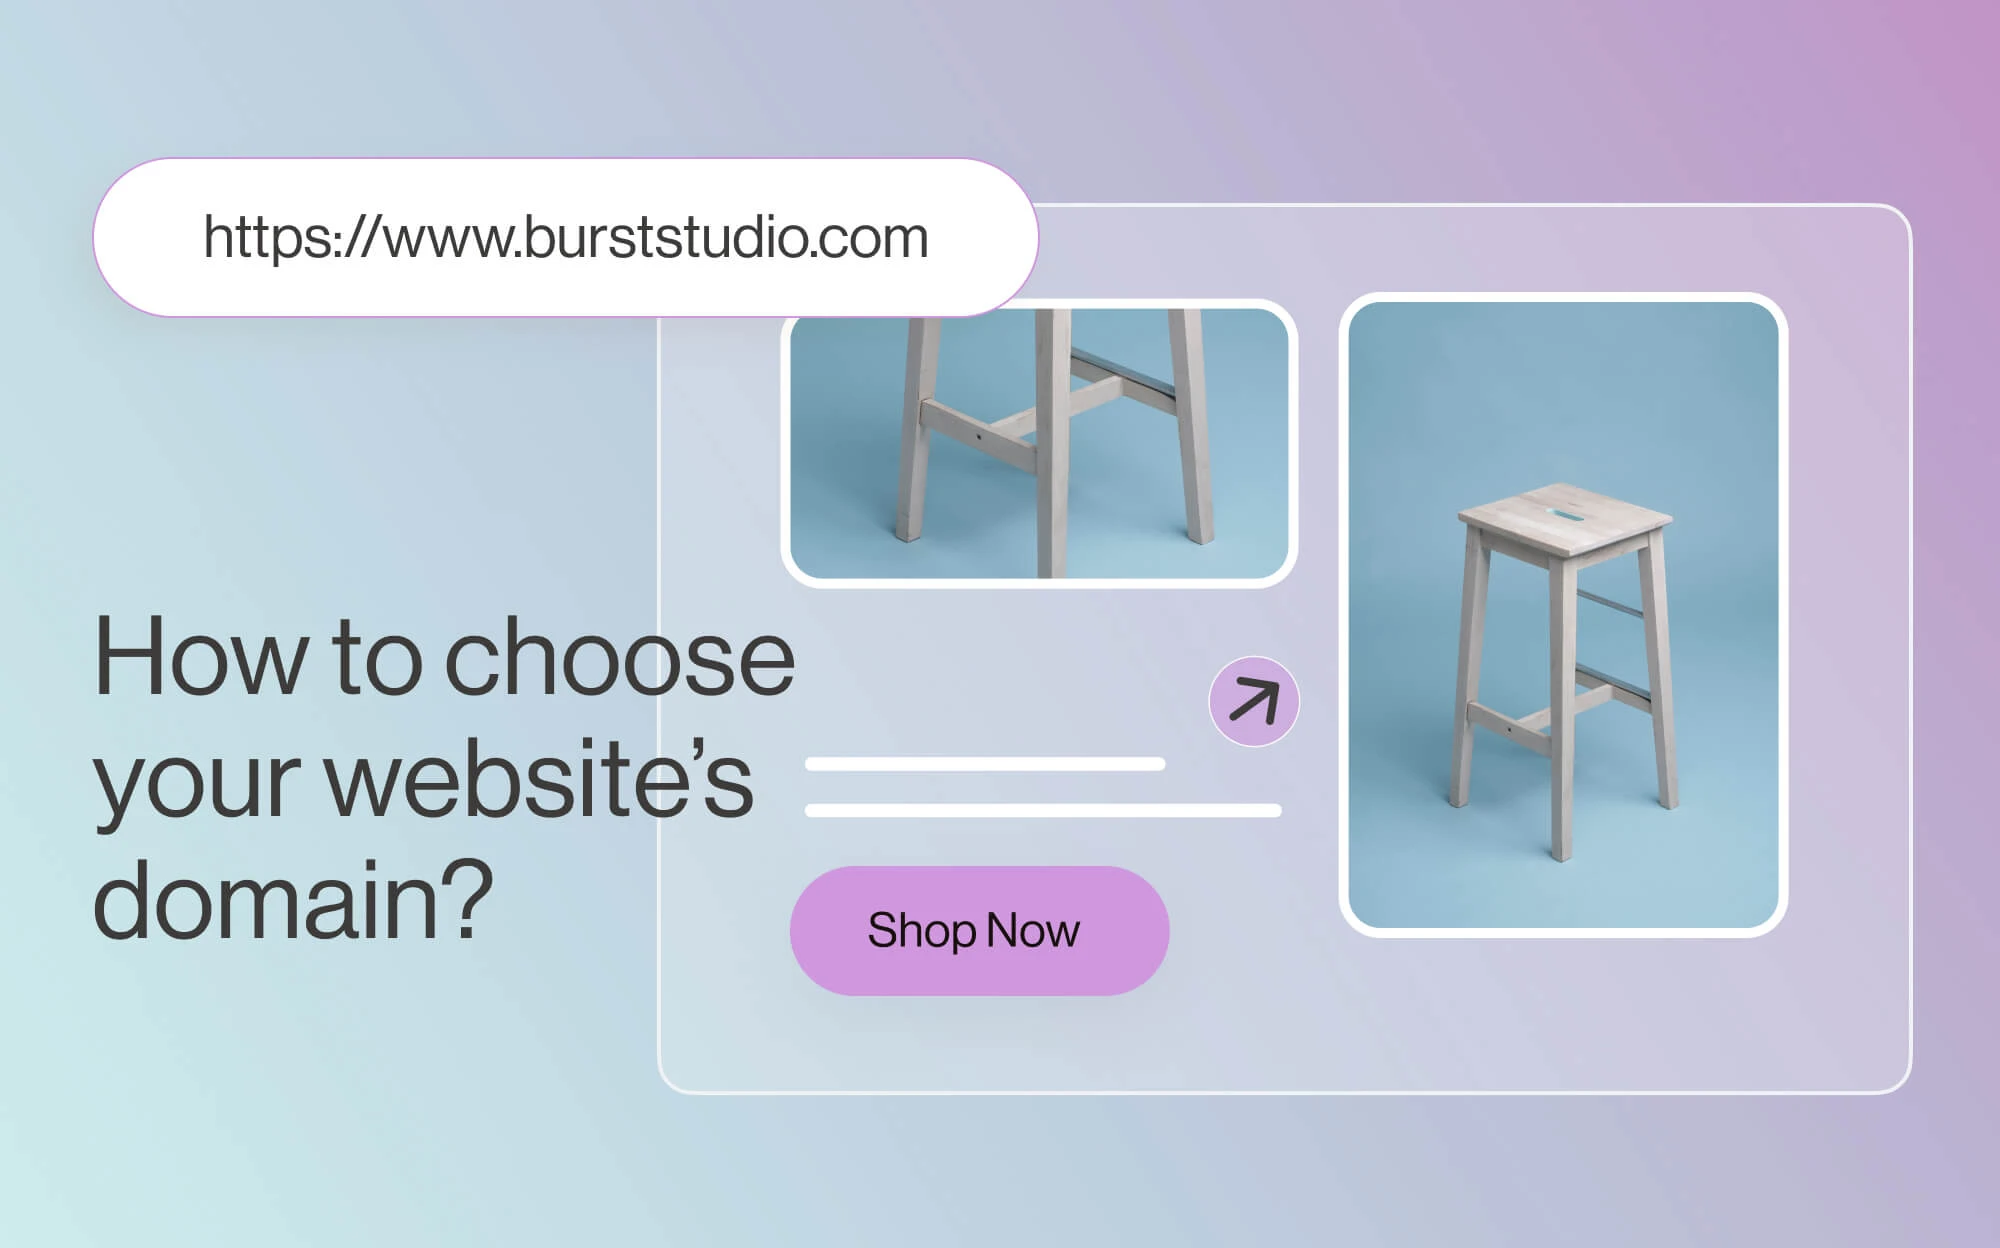 How to choose your website’s domain